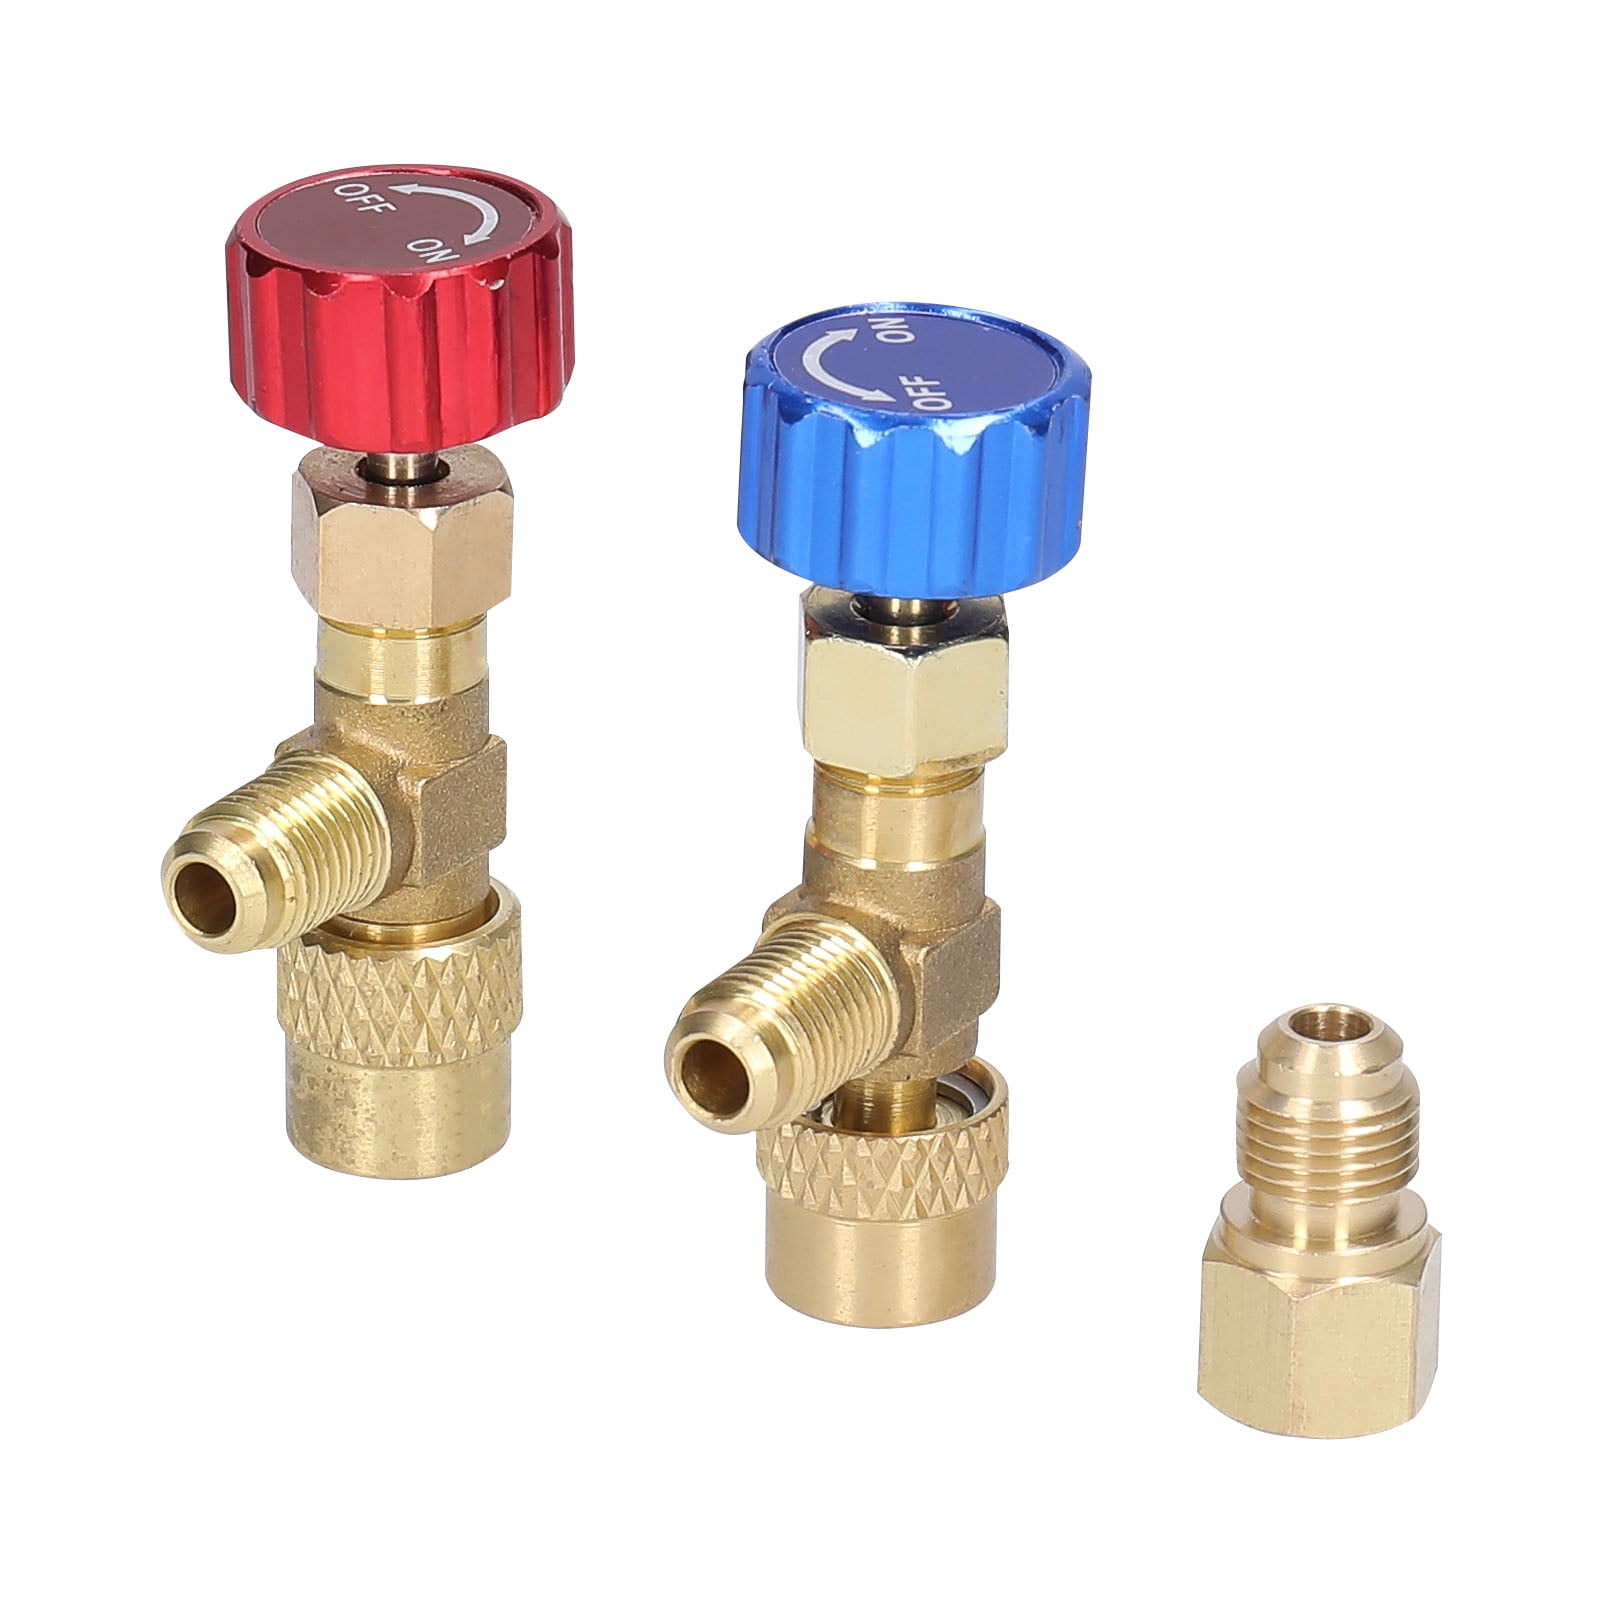 Air Conditioning Refrigerant Valve Adapter 1/4 SAE Male to 1/4 SAE Female and 1/4 SAE Male to 5/16 SAE Female Charging Hose Flow Control Valves Refrigeration Charging Adapter Connector